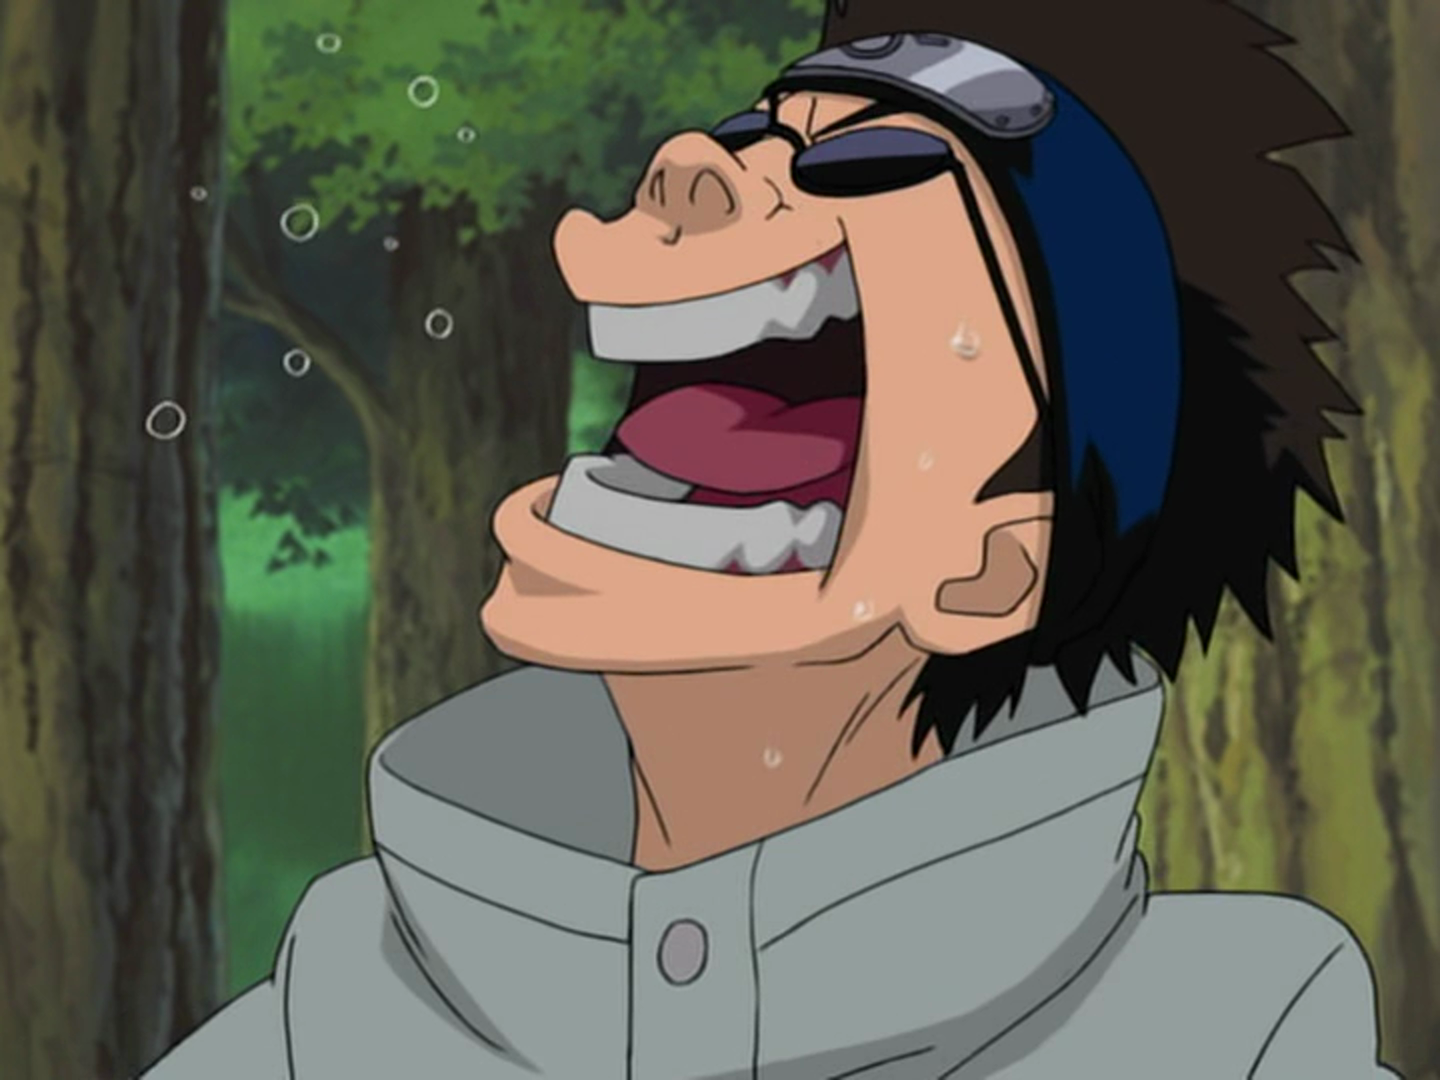 http://vignette3.wikia.nocookie.net/naruto/images/5/52/Laughing_Shino.png/revision/latest?cb=20150528190513